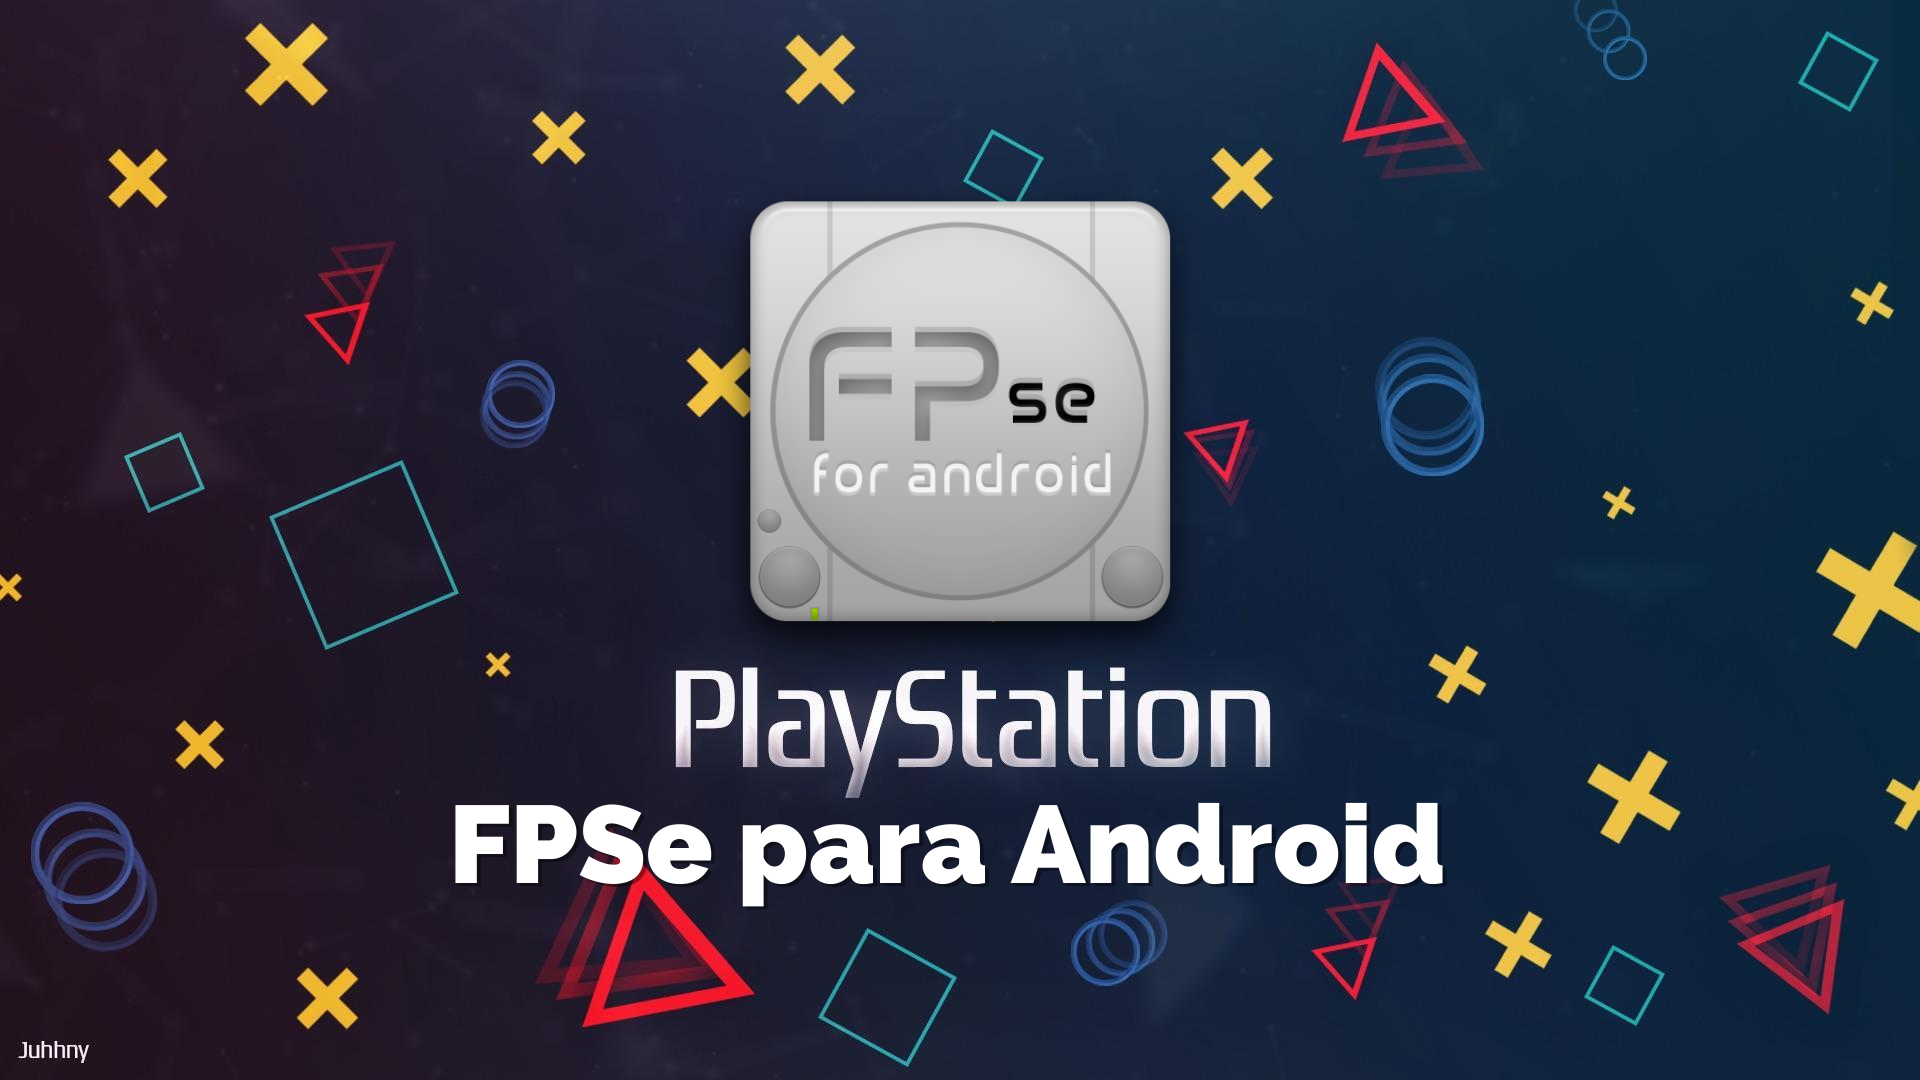 FPse For Android Devices